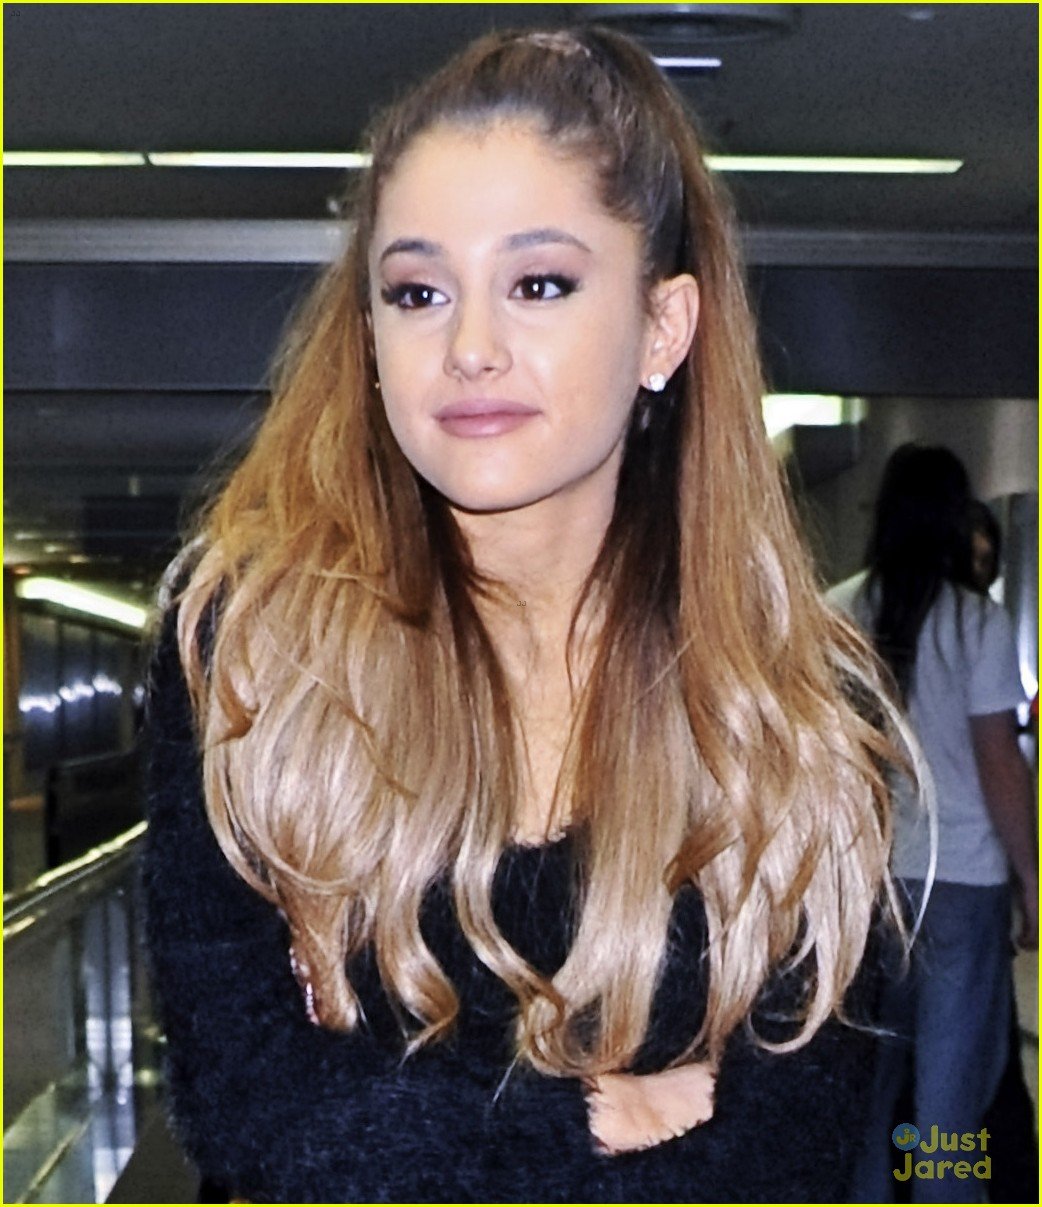 Ariana Grande on Diva Rumors: My Friends, Fans & Family Know Who I Am ...